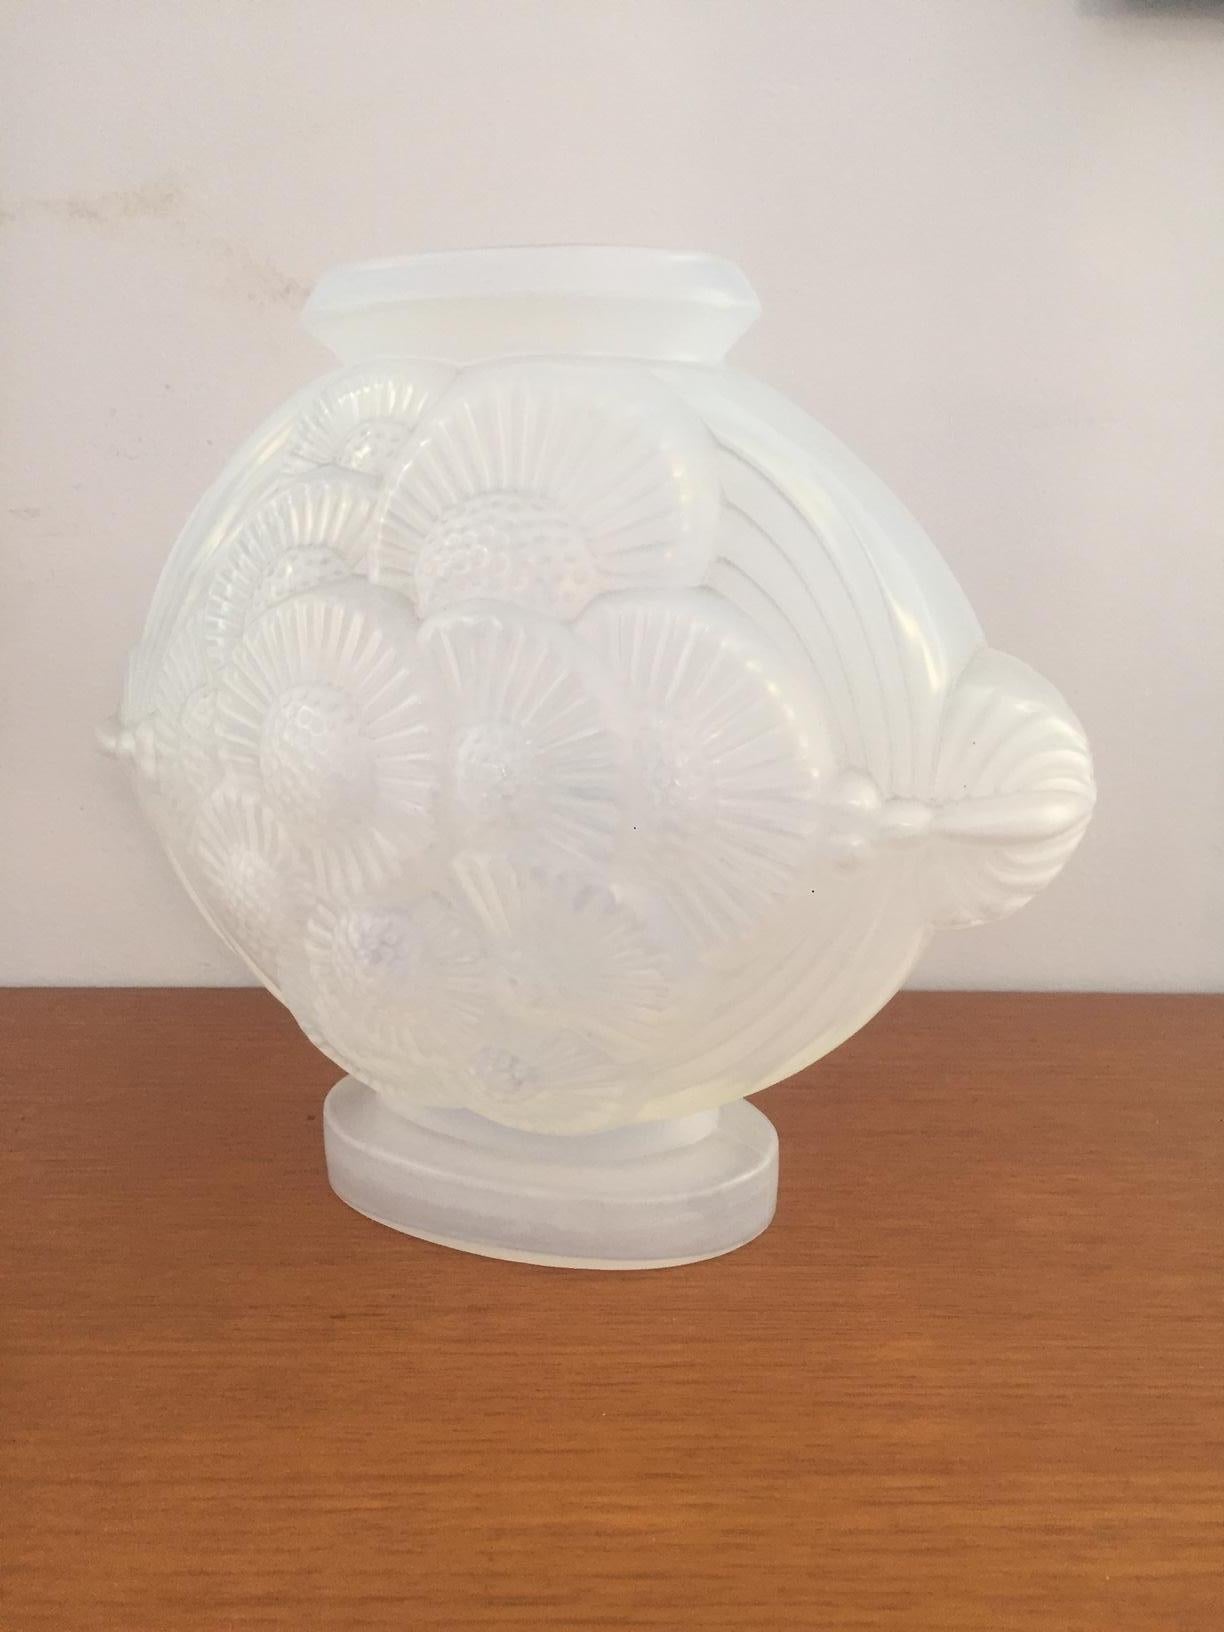 Very nice 20th century French frosted flowers Art Deco Eitling France (signed under) vase from the 1930s. White satin glass. Original shape. Ideal for a small flowers bouquet.
Not broken. Good condition.